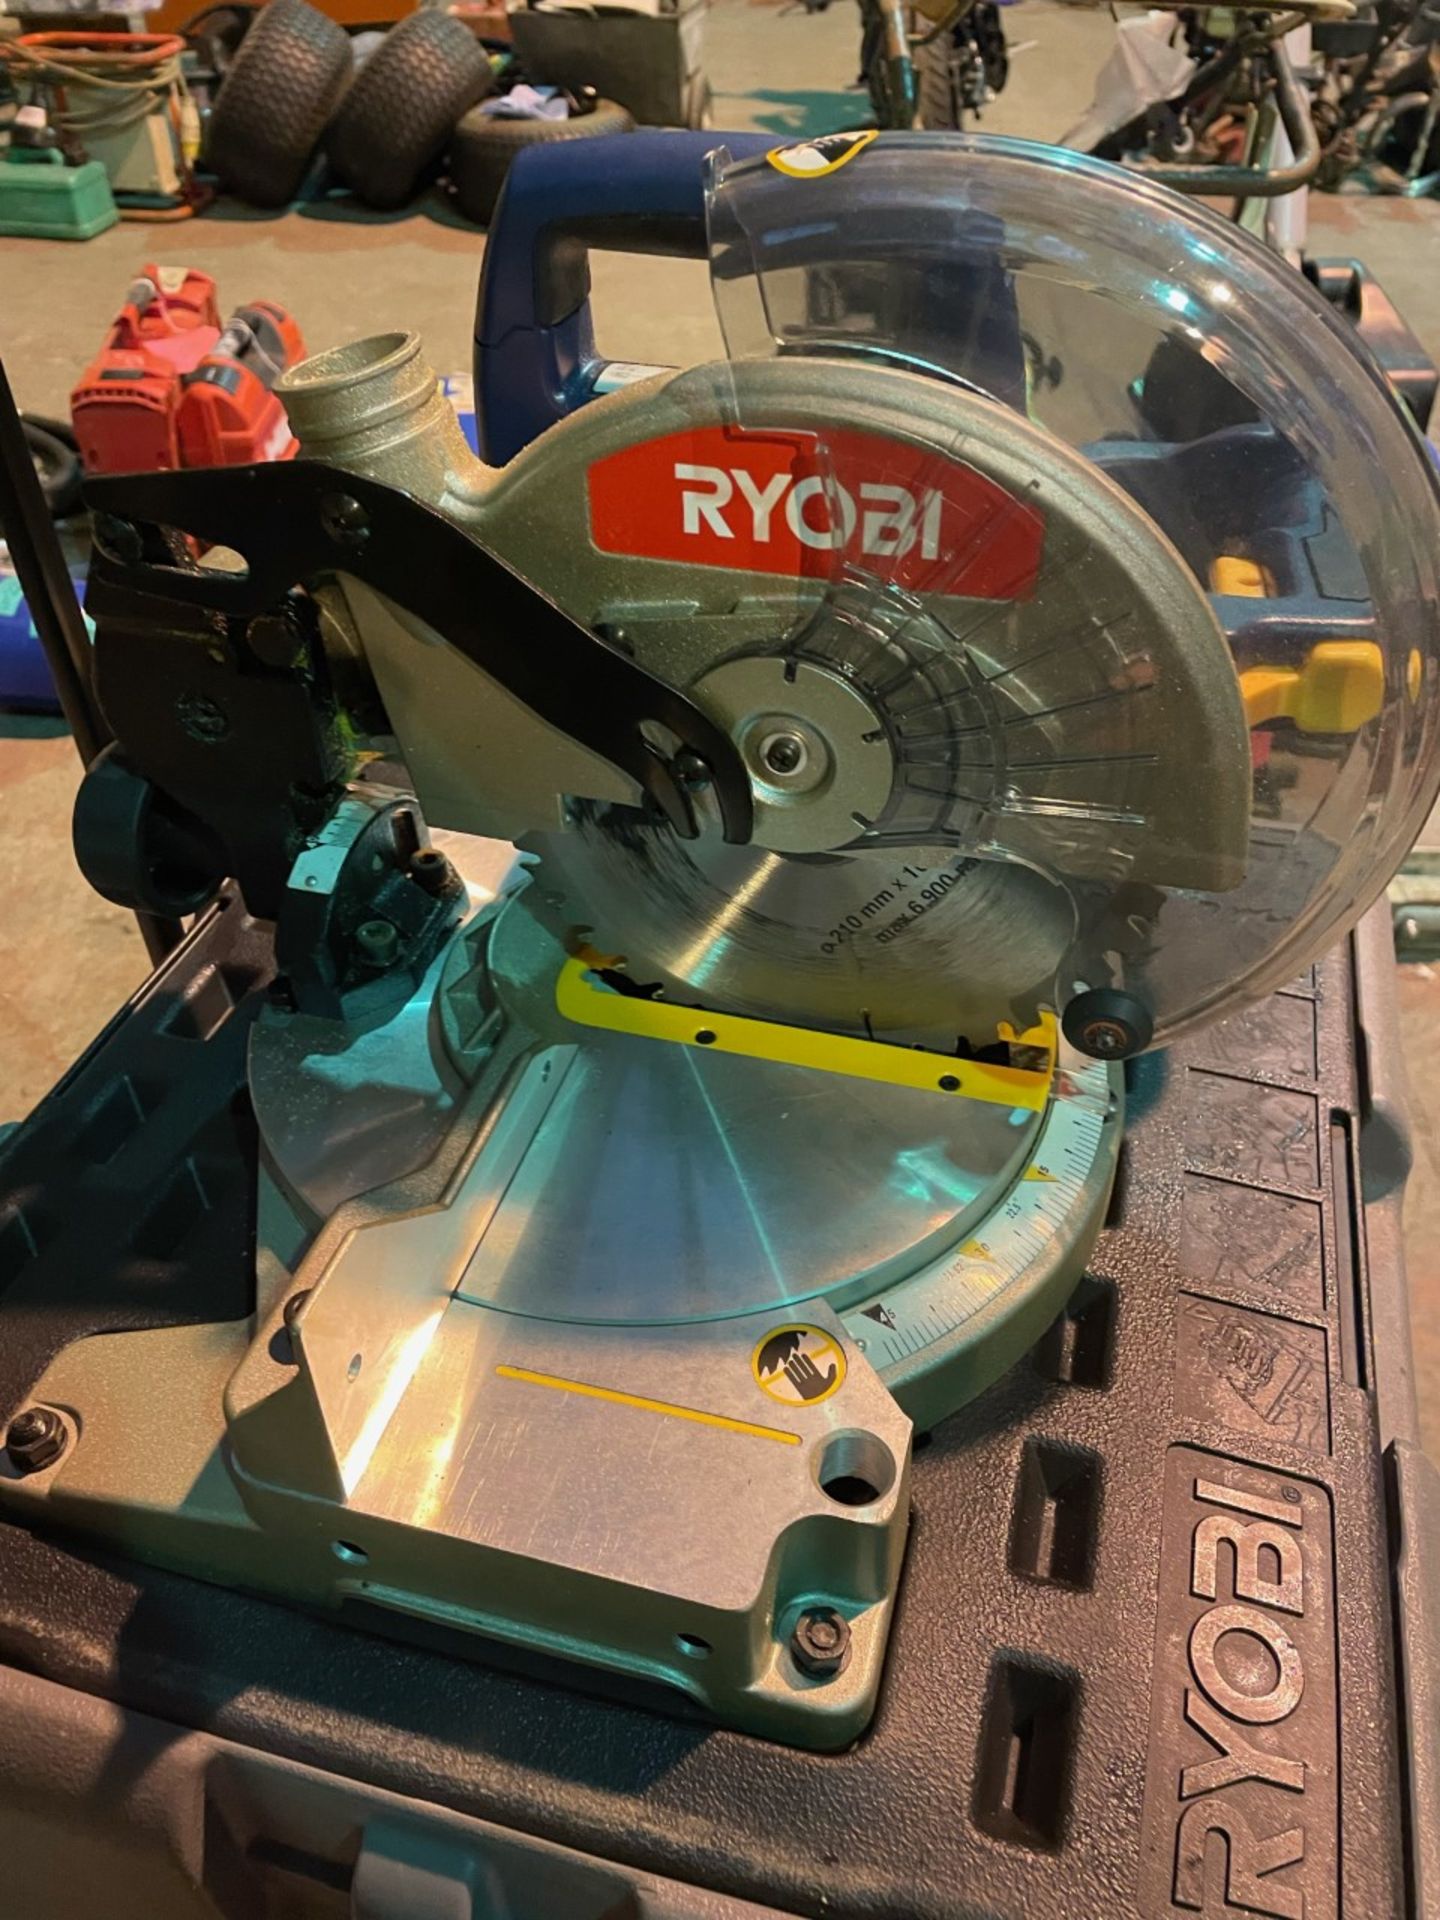 Ryobi 18v mitre saw on portable workstation. No batteries included. Saw is nearly new. - Image 2 of 2